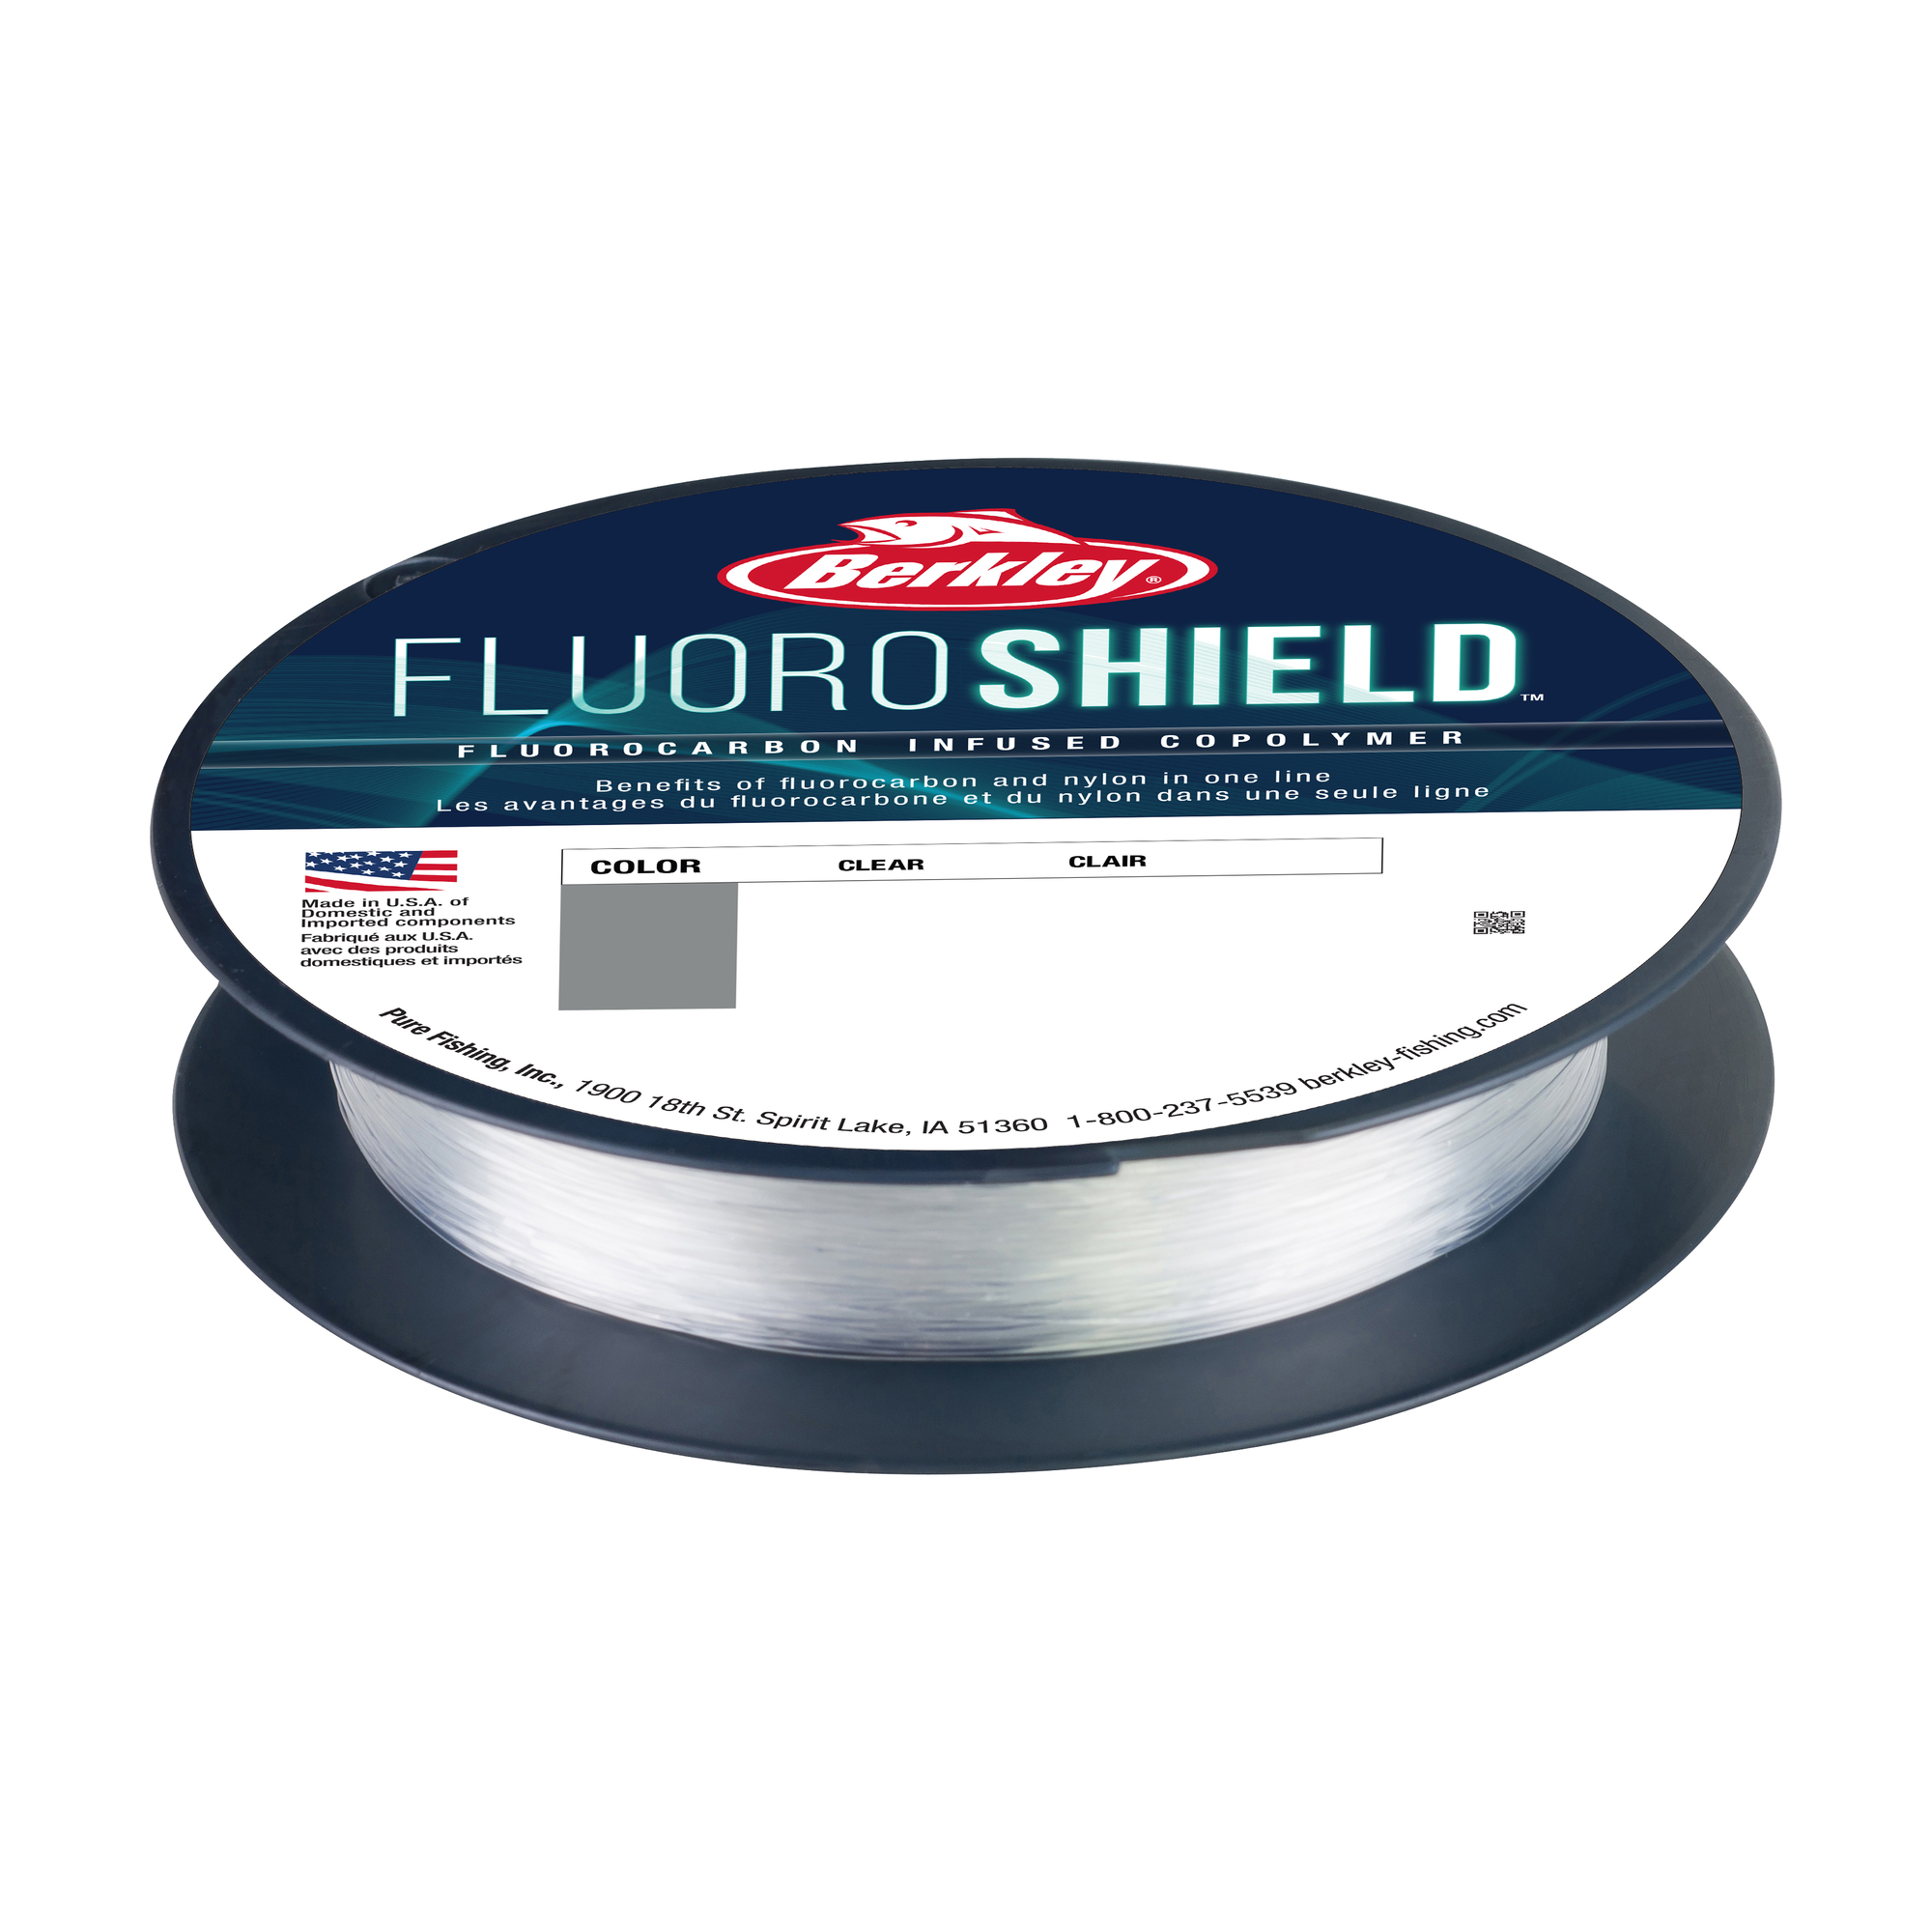 https://cs1.0ps.us/original/opplanet-berkley-fluoroshield-fluorocarbon-infused-co-polymer-clear-manageable-on-both-spinning-and-casting-gear-6lb-300yds-bfsvf6-15-main